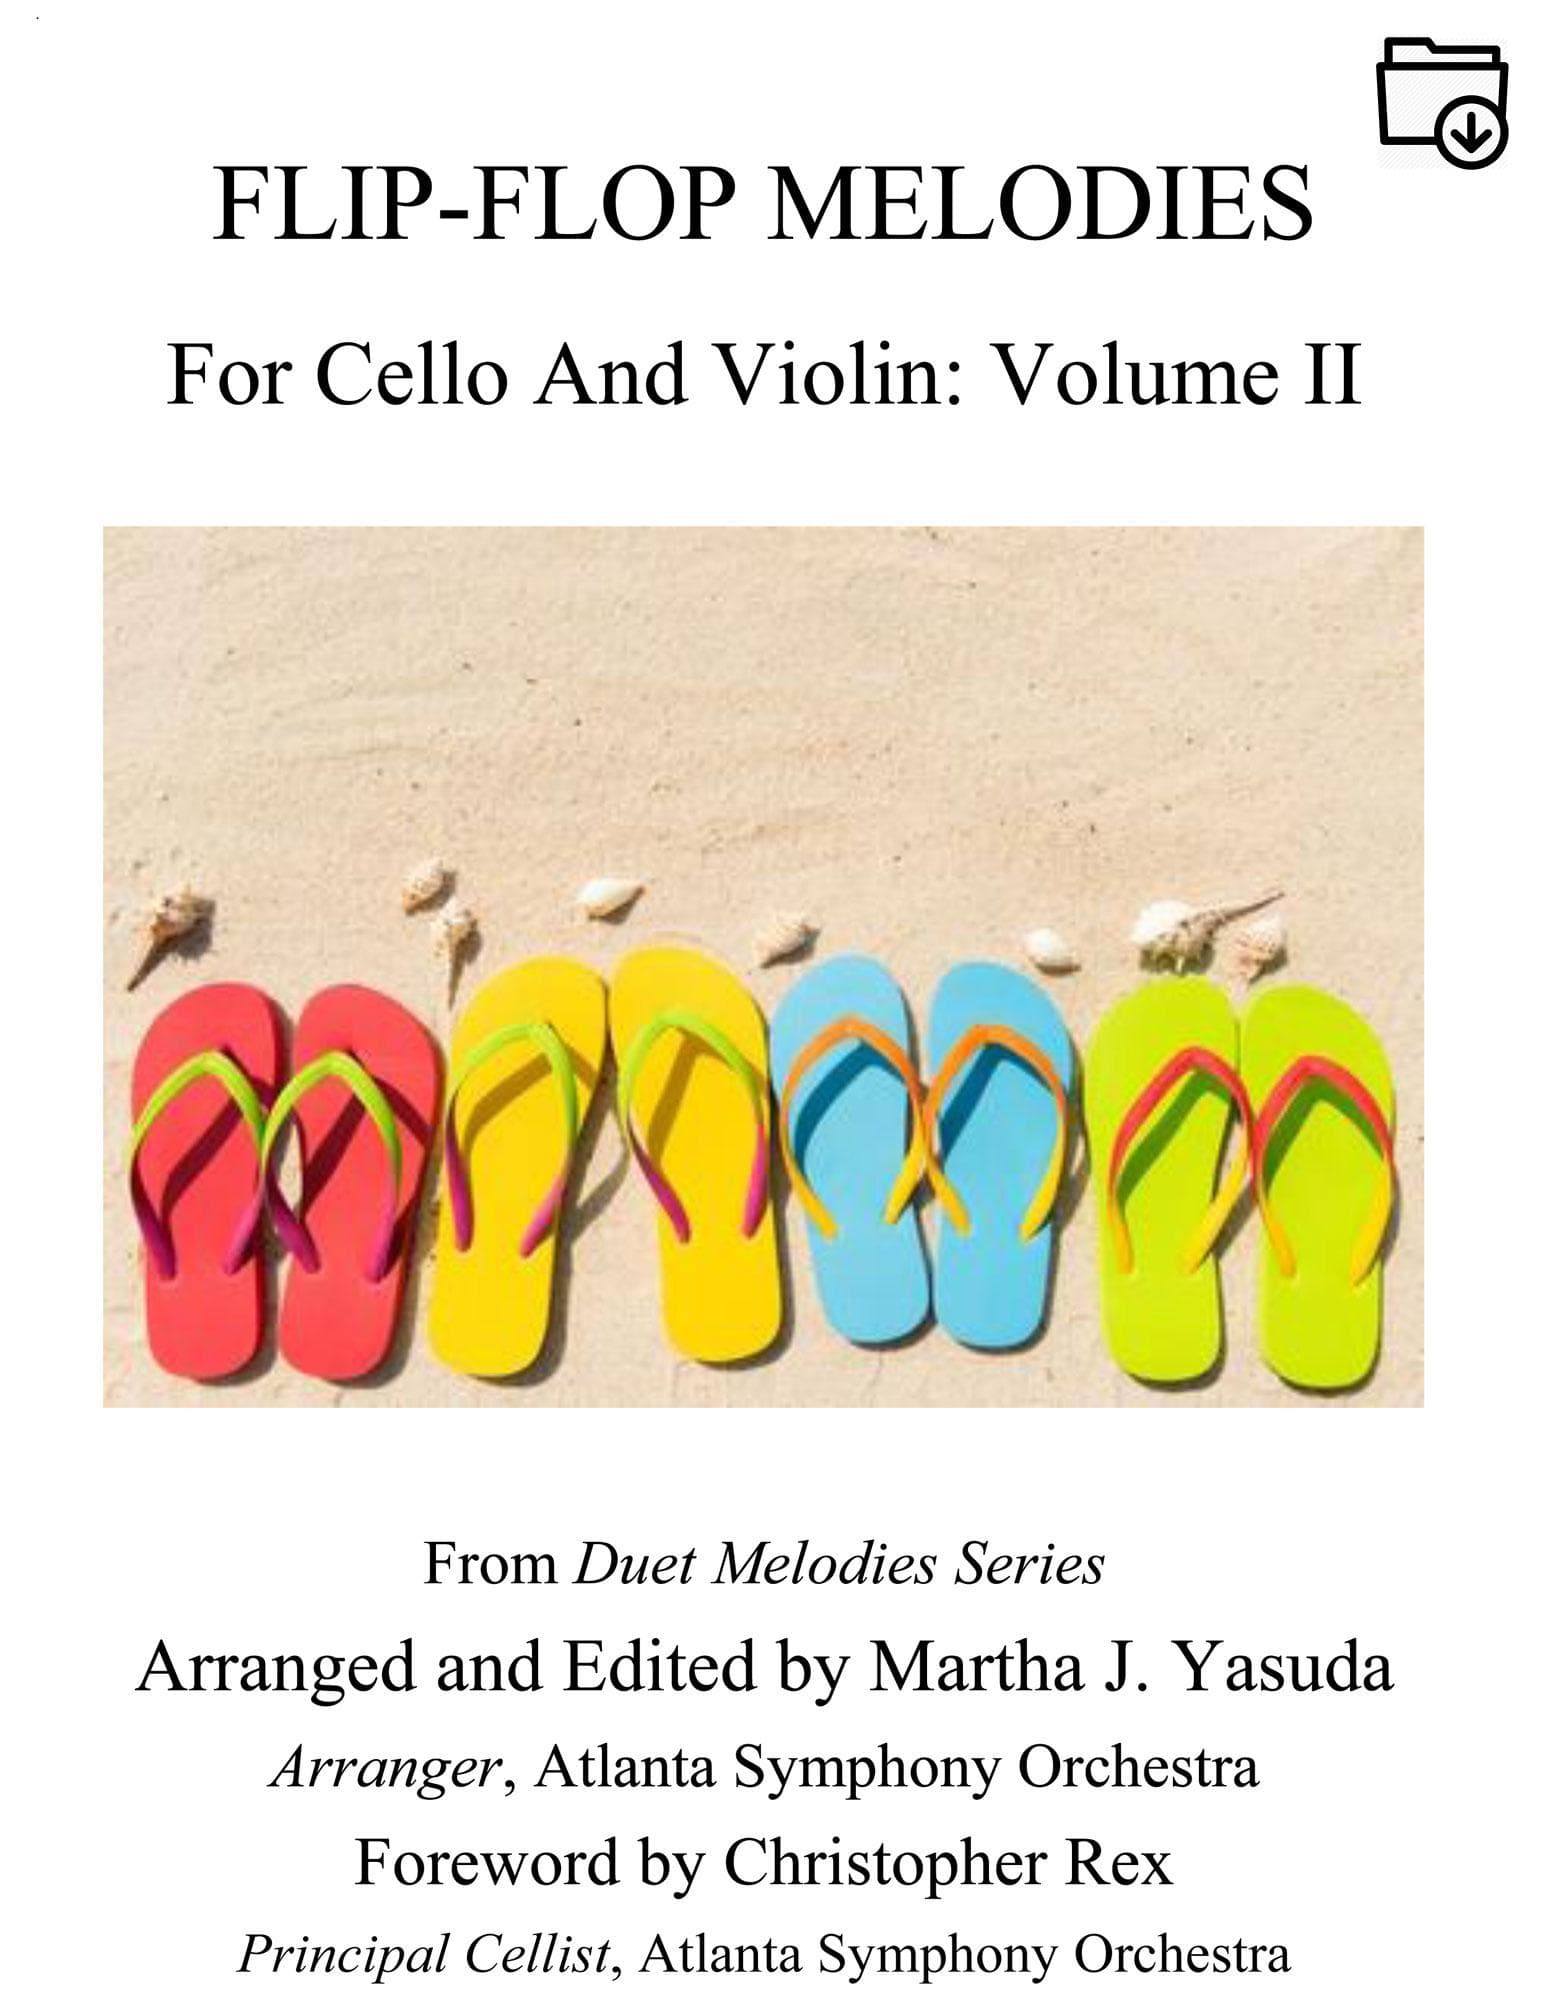 Yasuda, Martha - Flip-Flop Melodies For Cello and Violin, Volume II, 2nd Edition - Digital Download